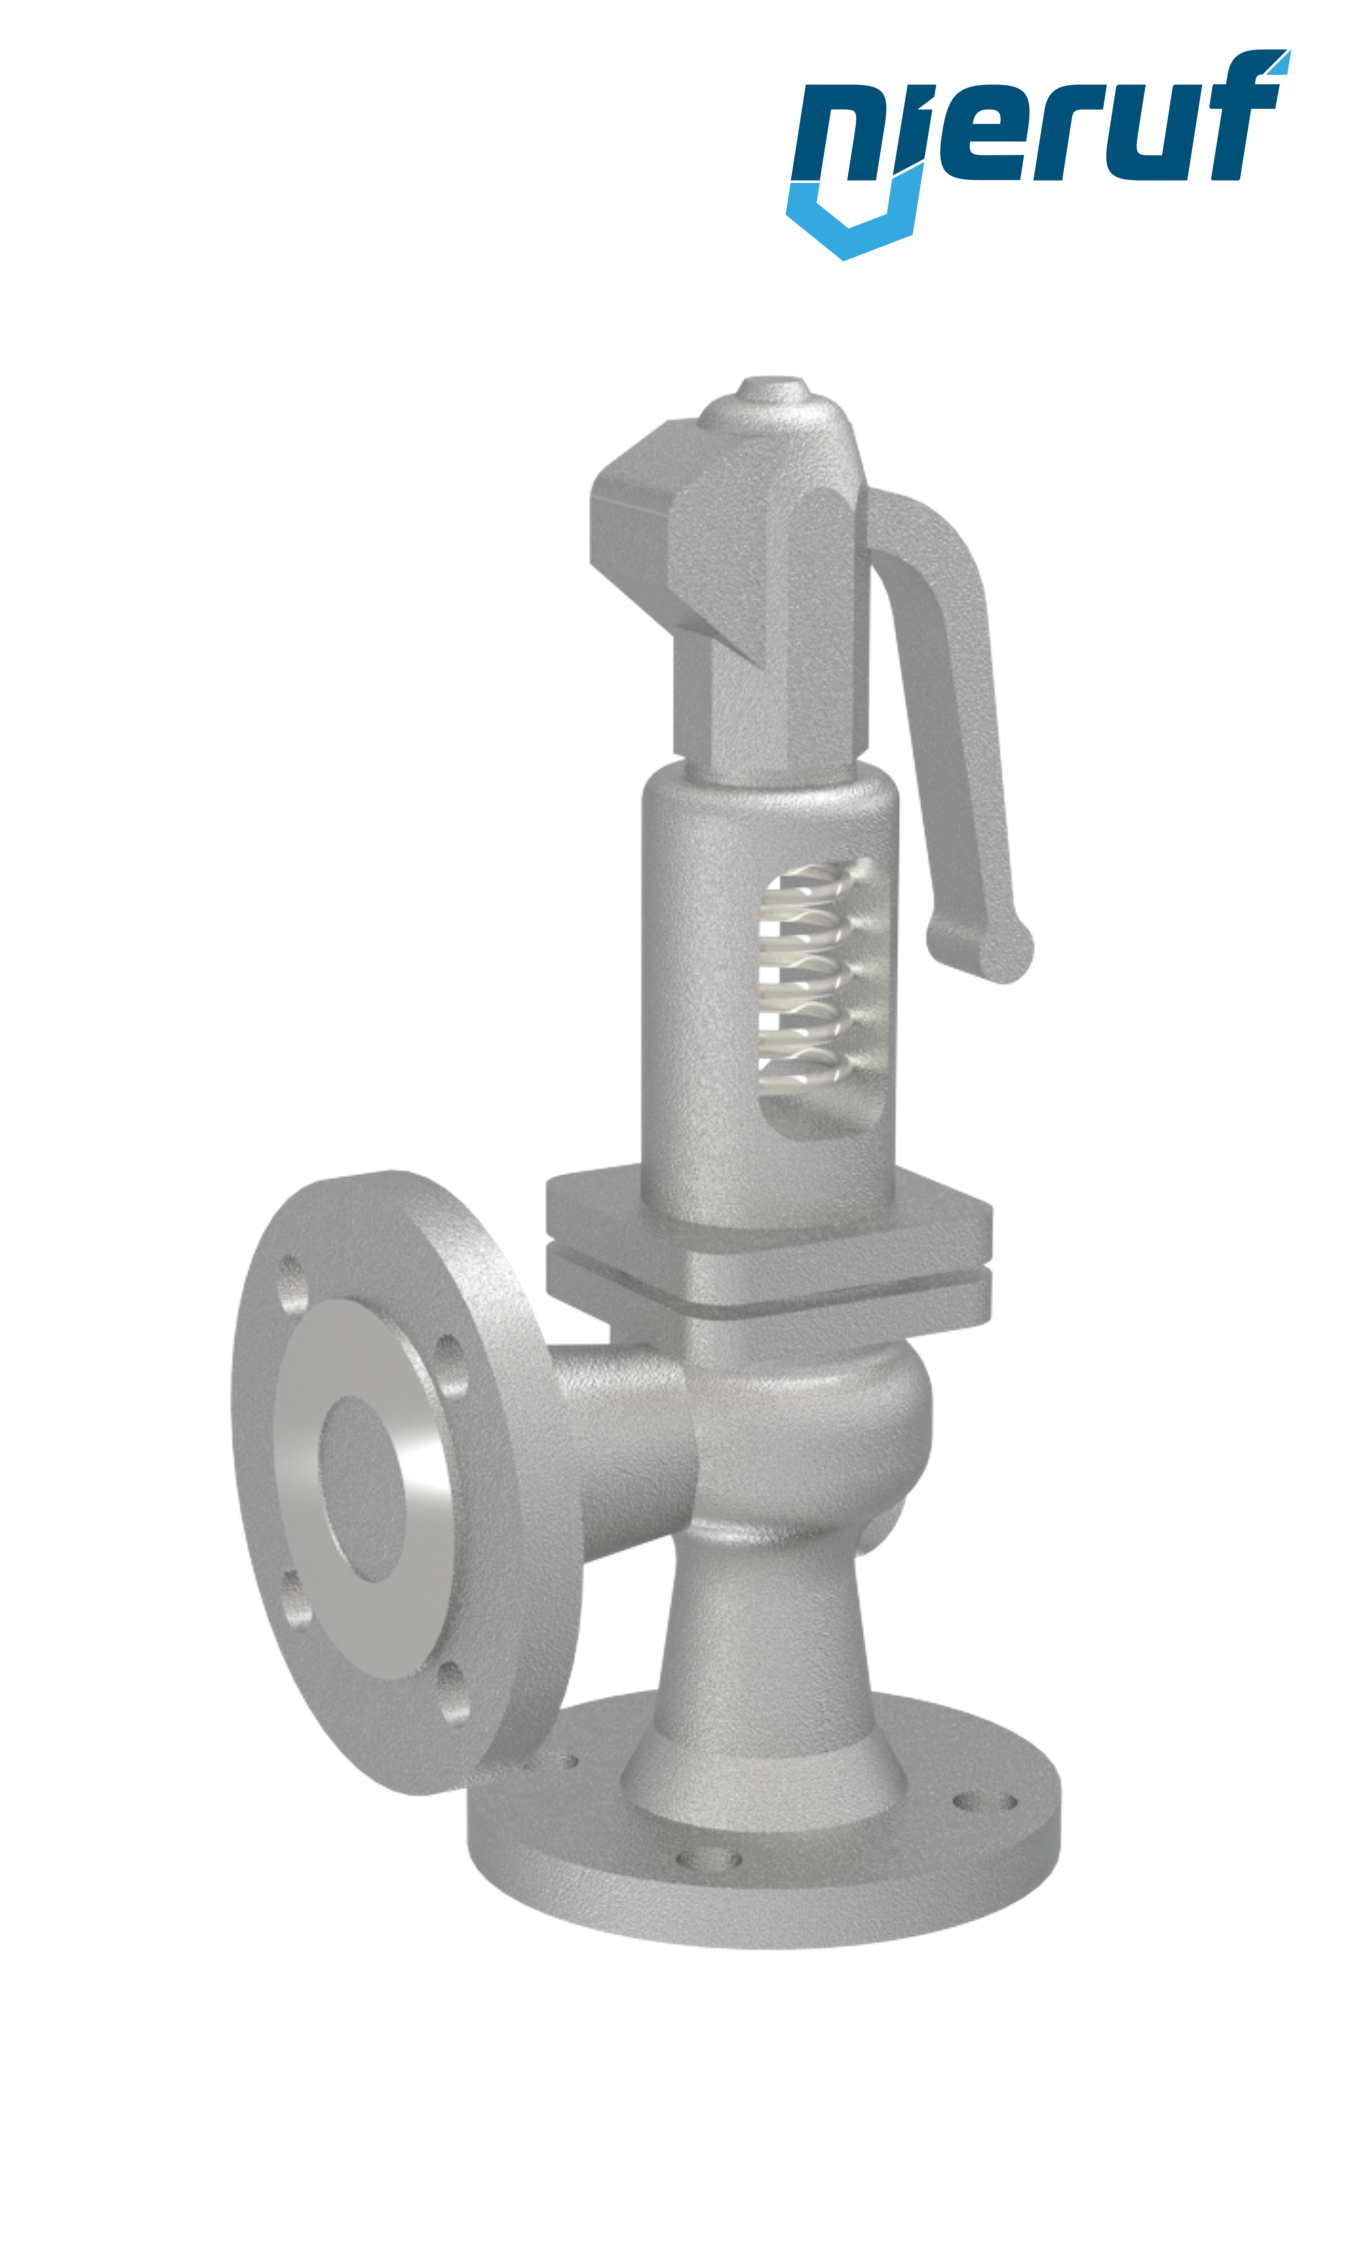 flange-safety valve DN20/DN20 SF0102, cast iron EN-JL1040 metal, with lever